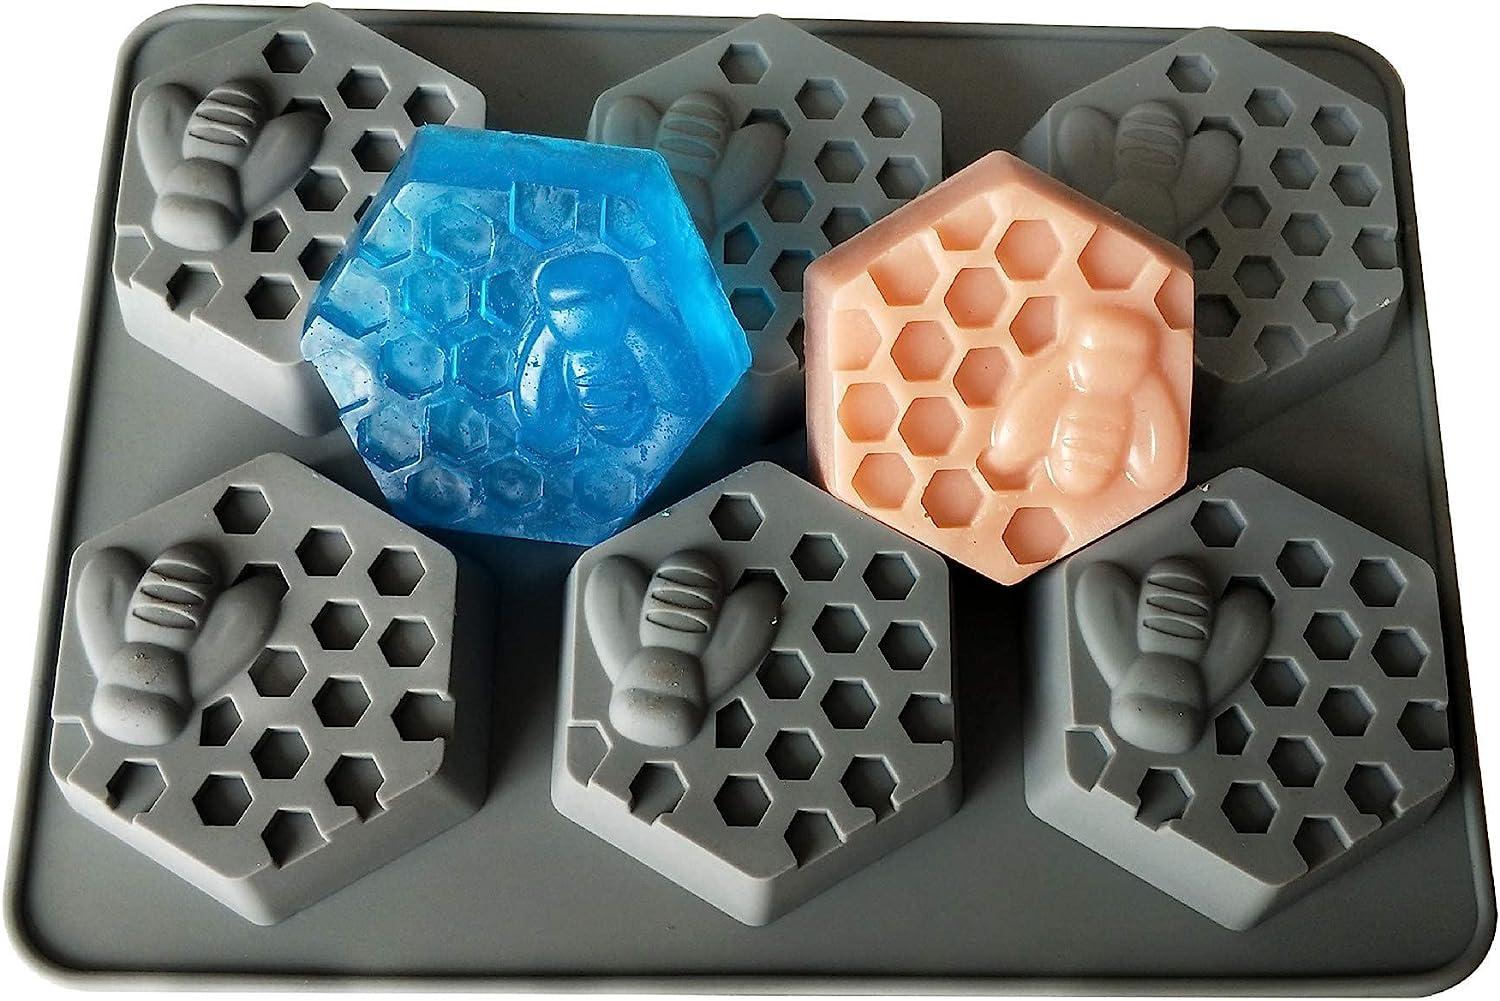 YUZBOU 19 Cells Bee Honeycomb Shaped 3D Soap Molds Silicone Bee Hive Moulds for Baking, As Shown